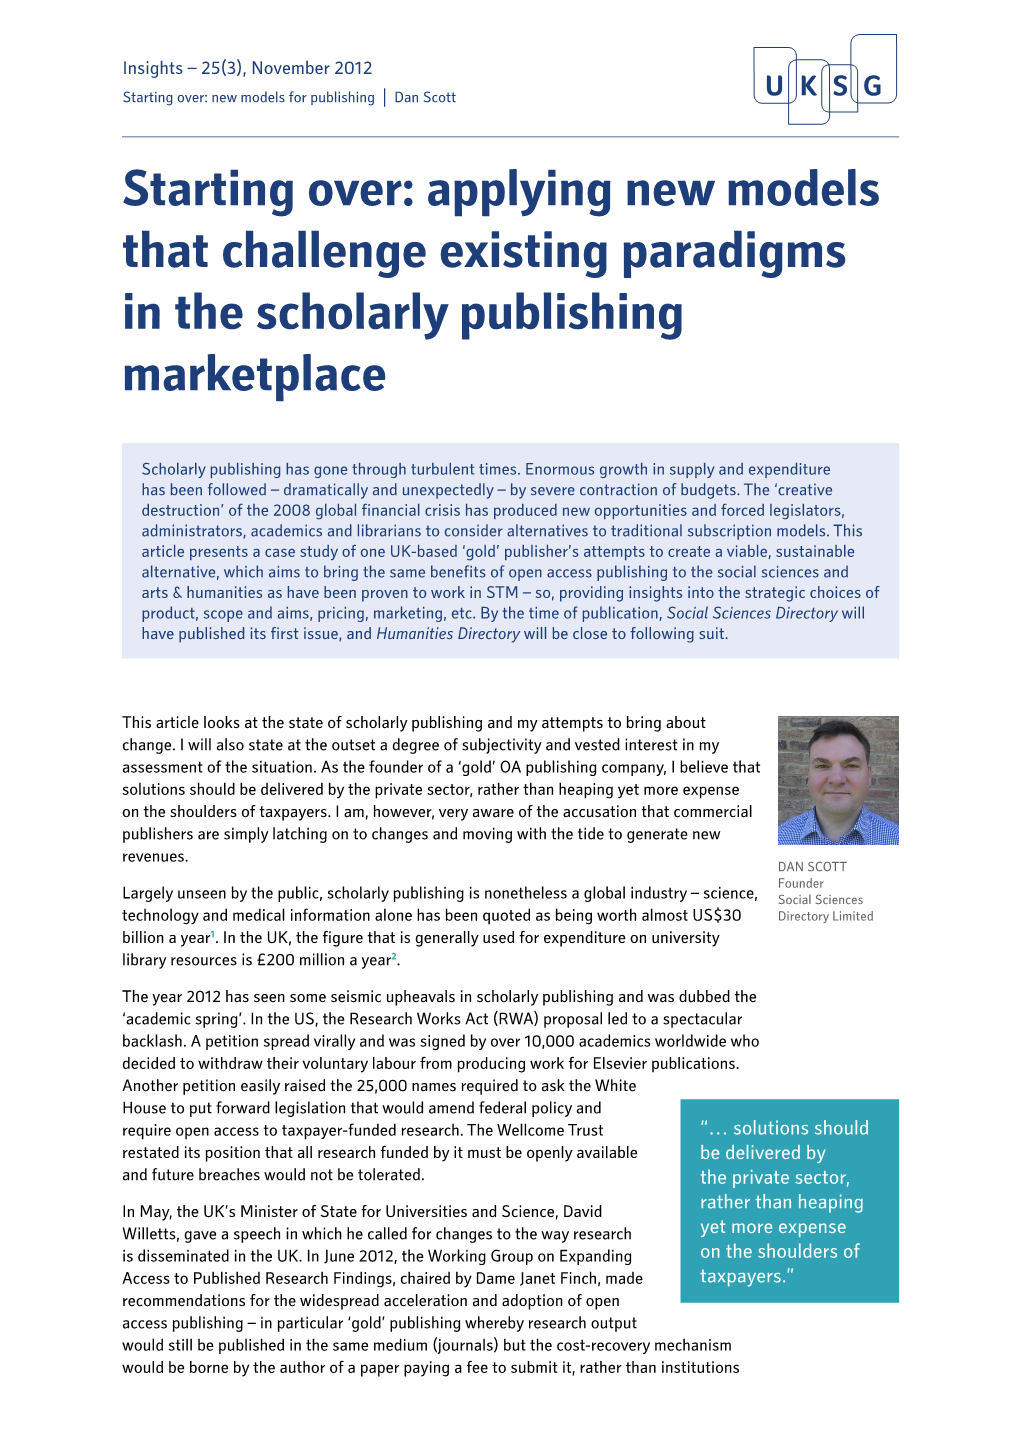 Applying New Models That Challenge Existing Paradigms in the Scholarly Publishing Marketplace